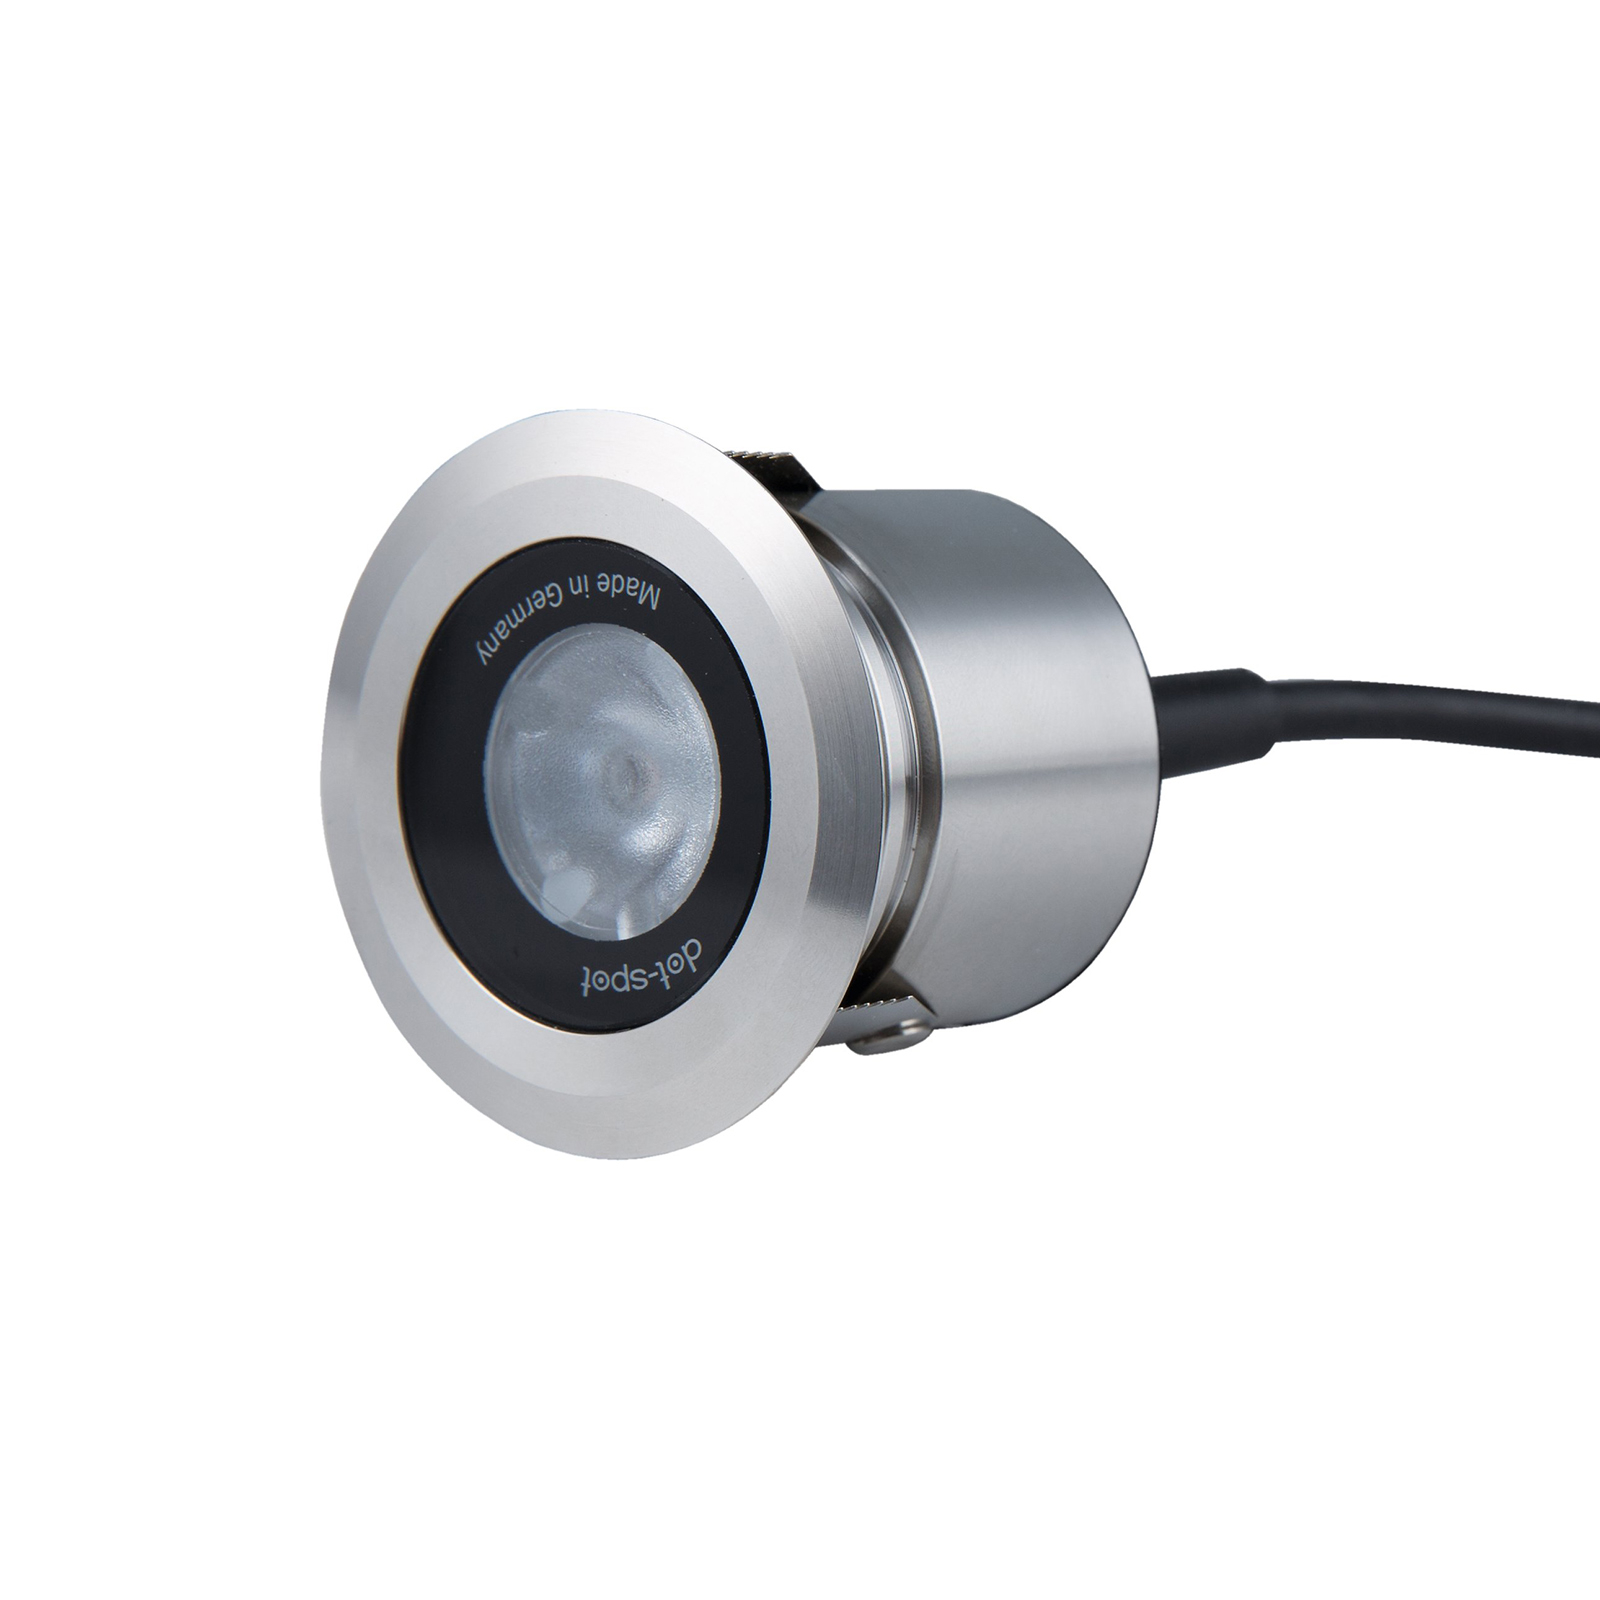 LED inbouwlamp Thermoprotect, | Lampen24.nl